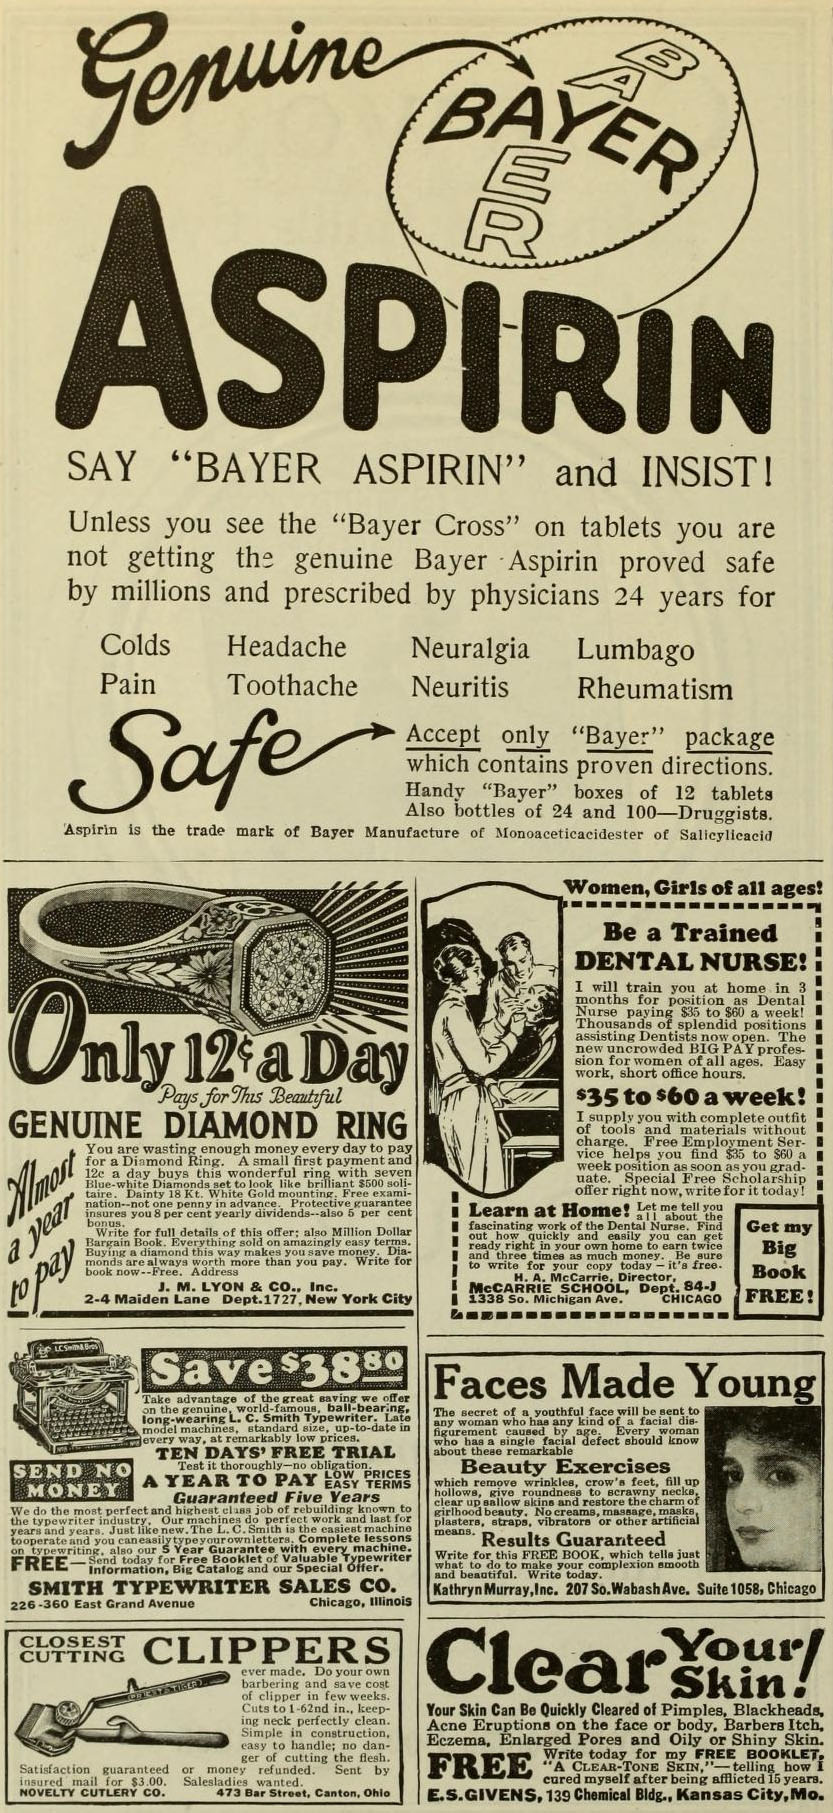 Old newspaper advertisement for Aspirin, diamond rings, clippers, face creams, typewriters, and training to be a dental nurse.